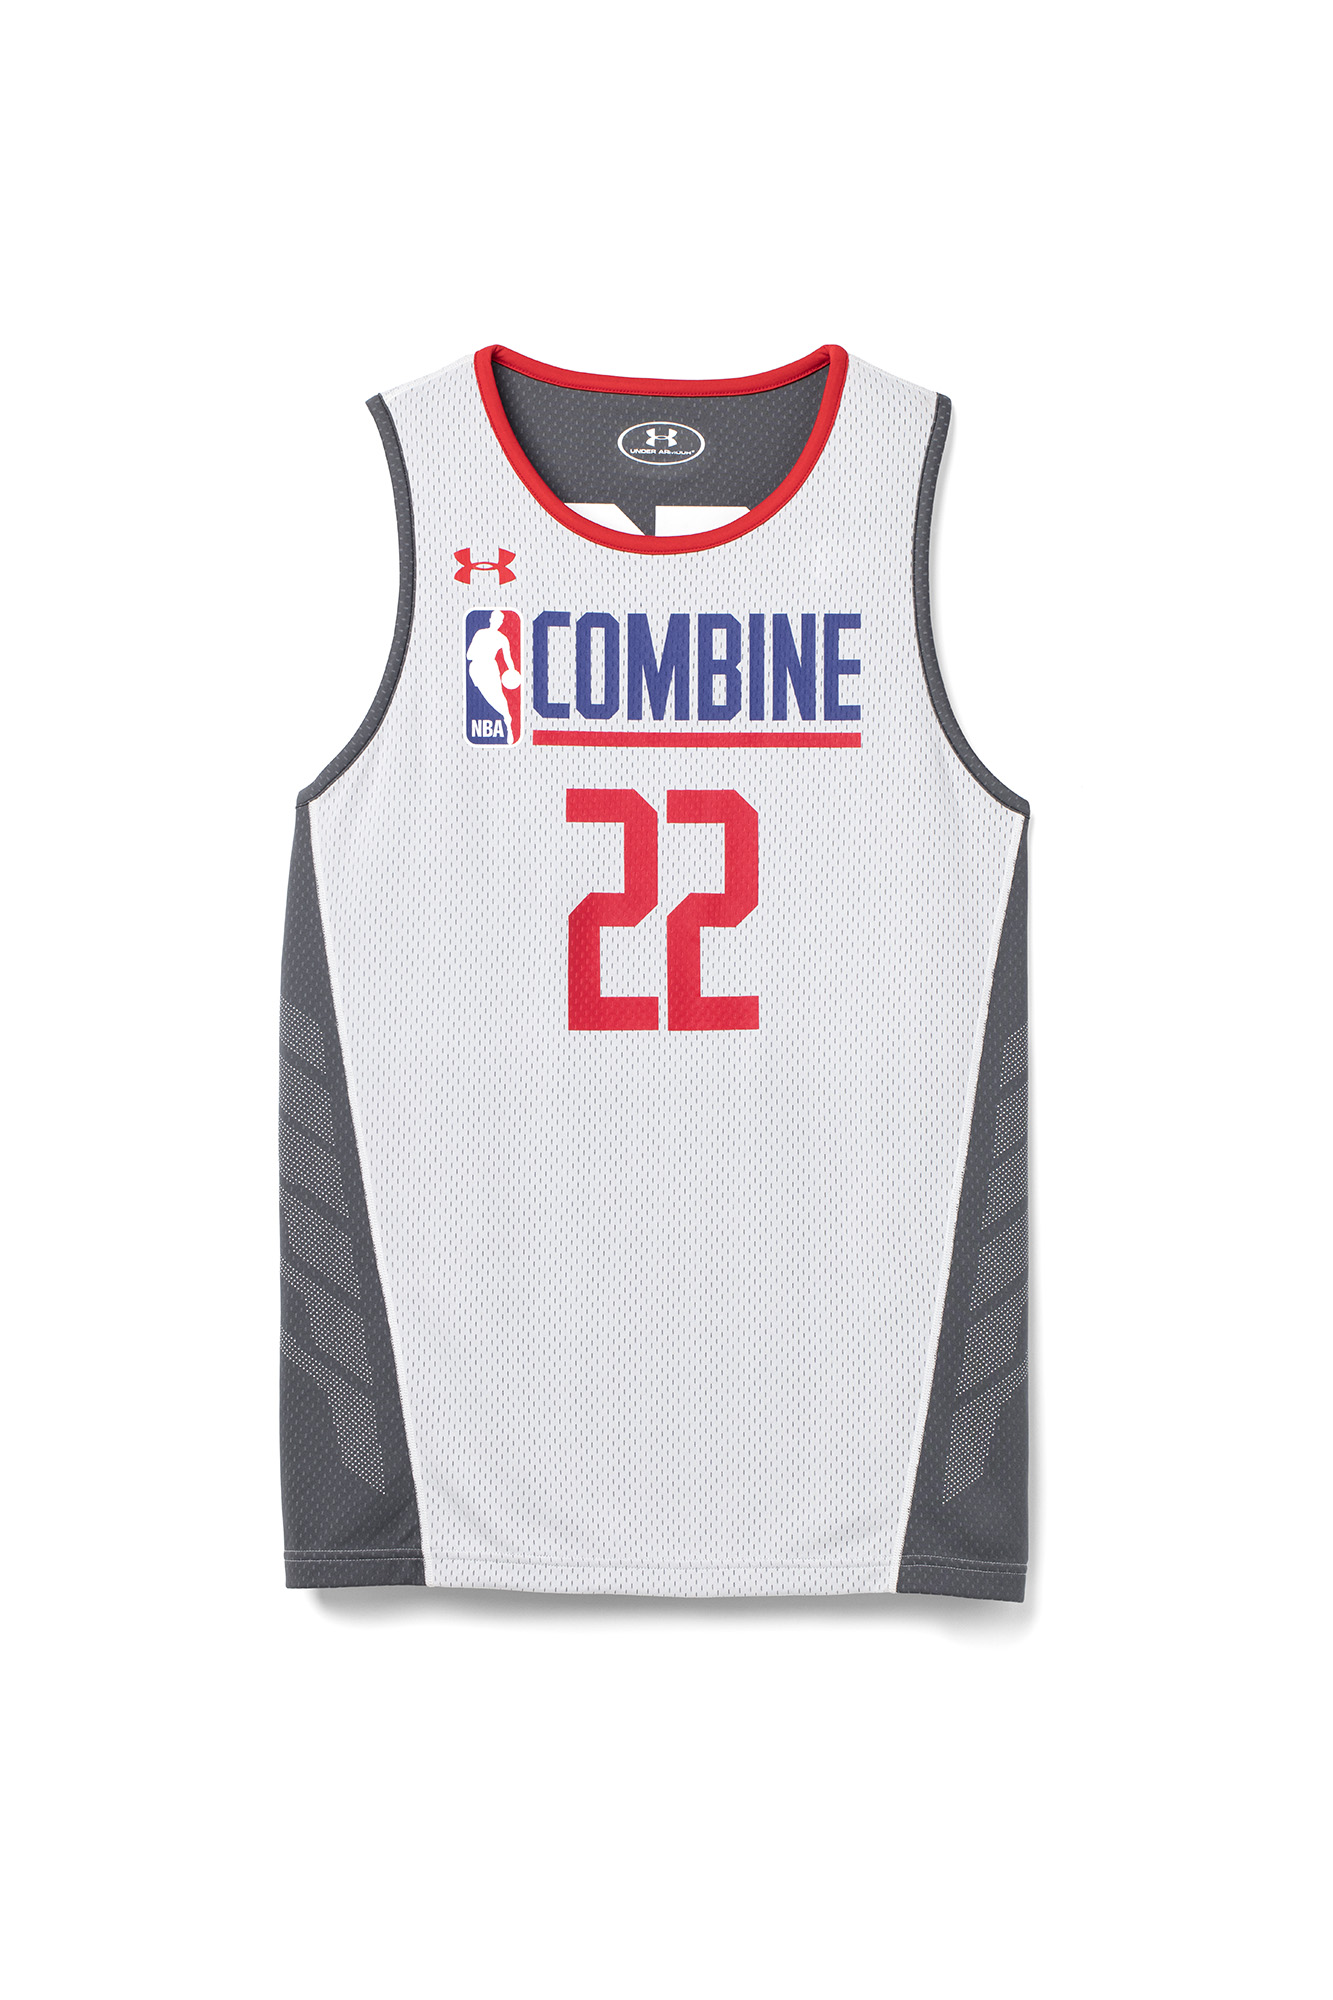 Under Armour is Now the NBA Draft Combine's Official Outfitter - WearTesters